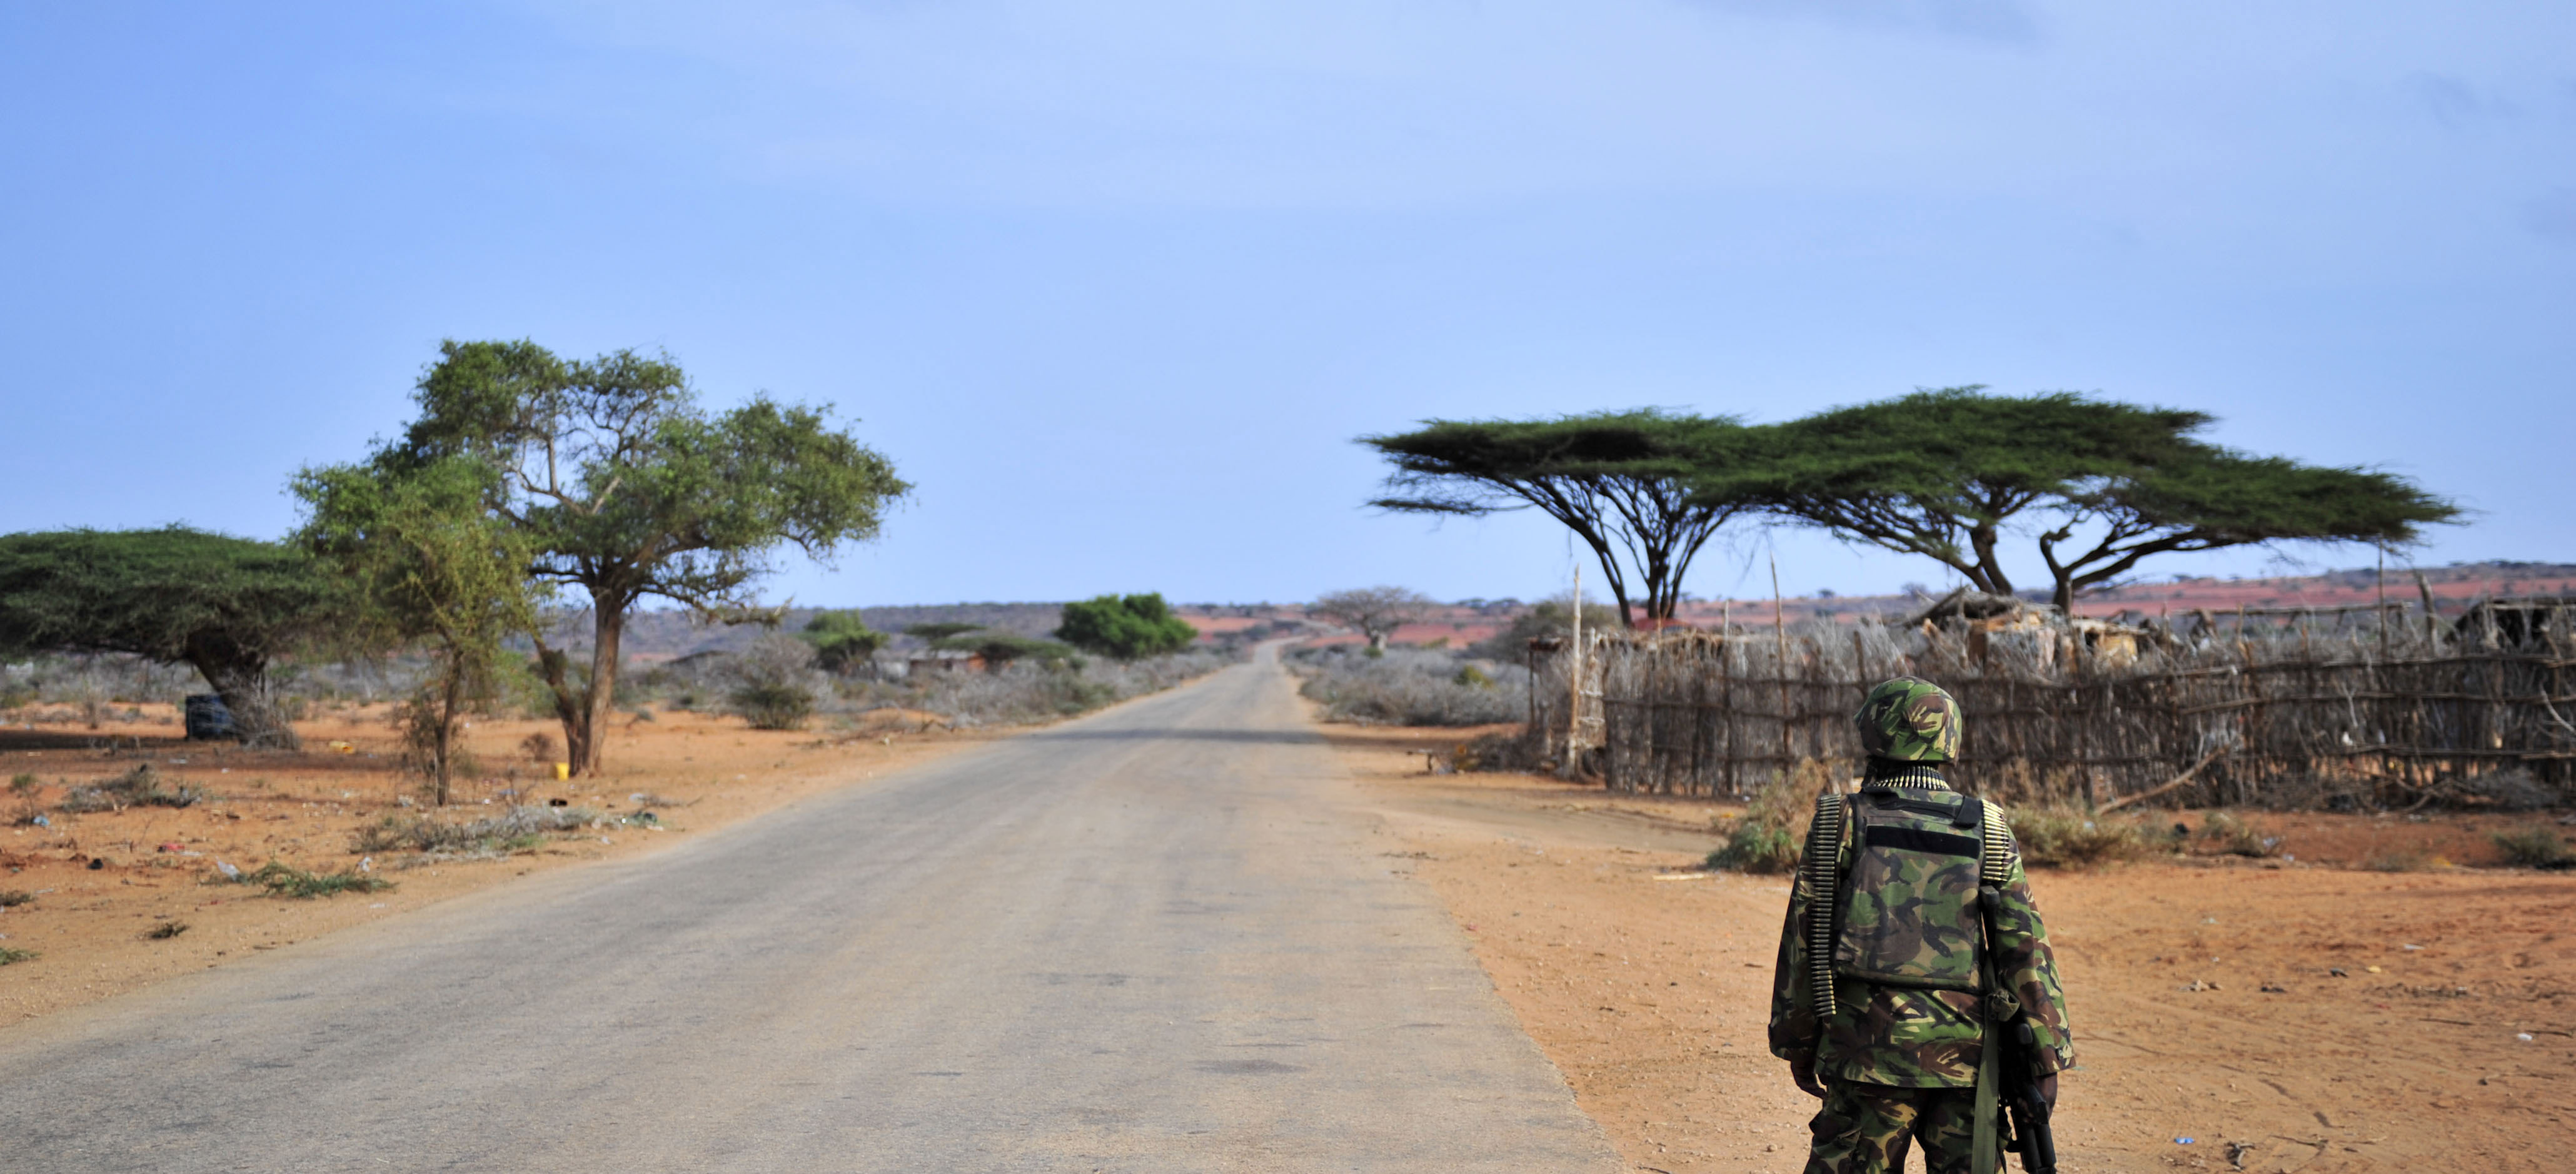 Help SoA and US troops defeat terrorism & restore stability in Somalia